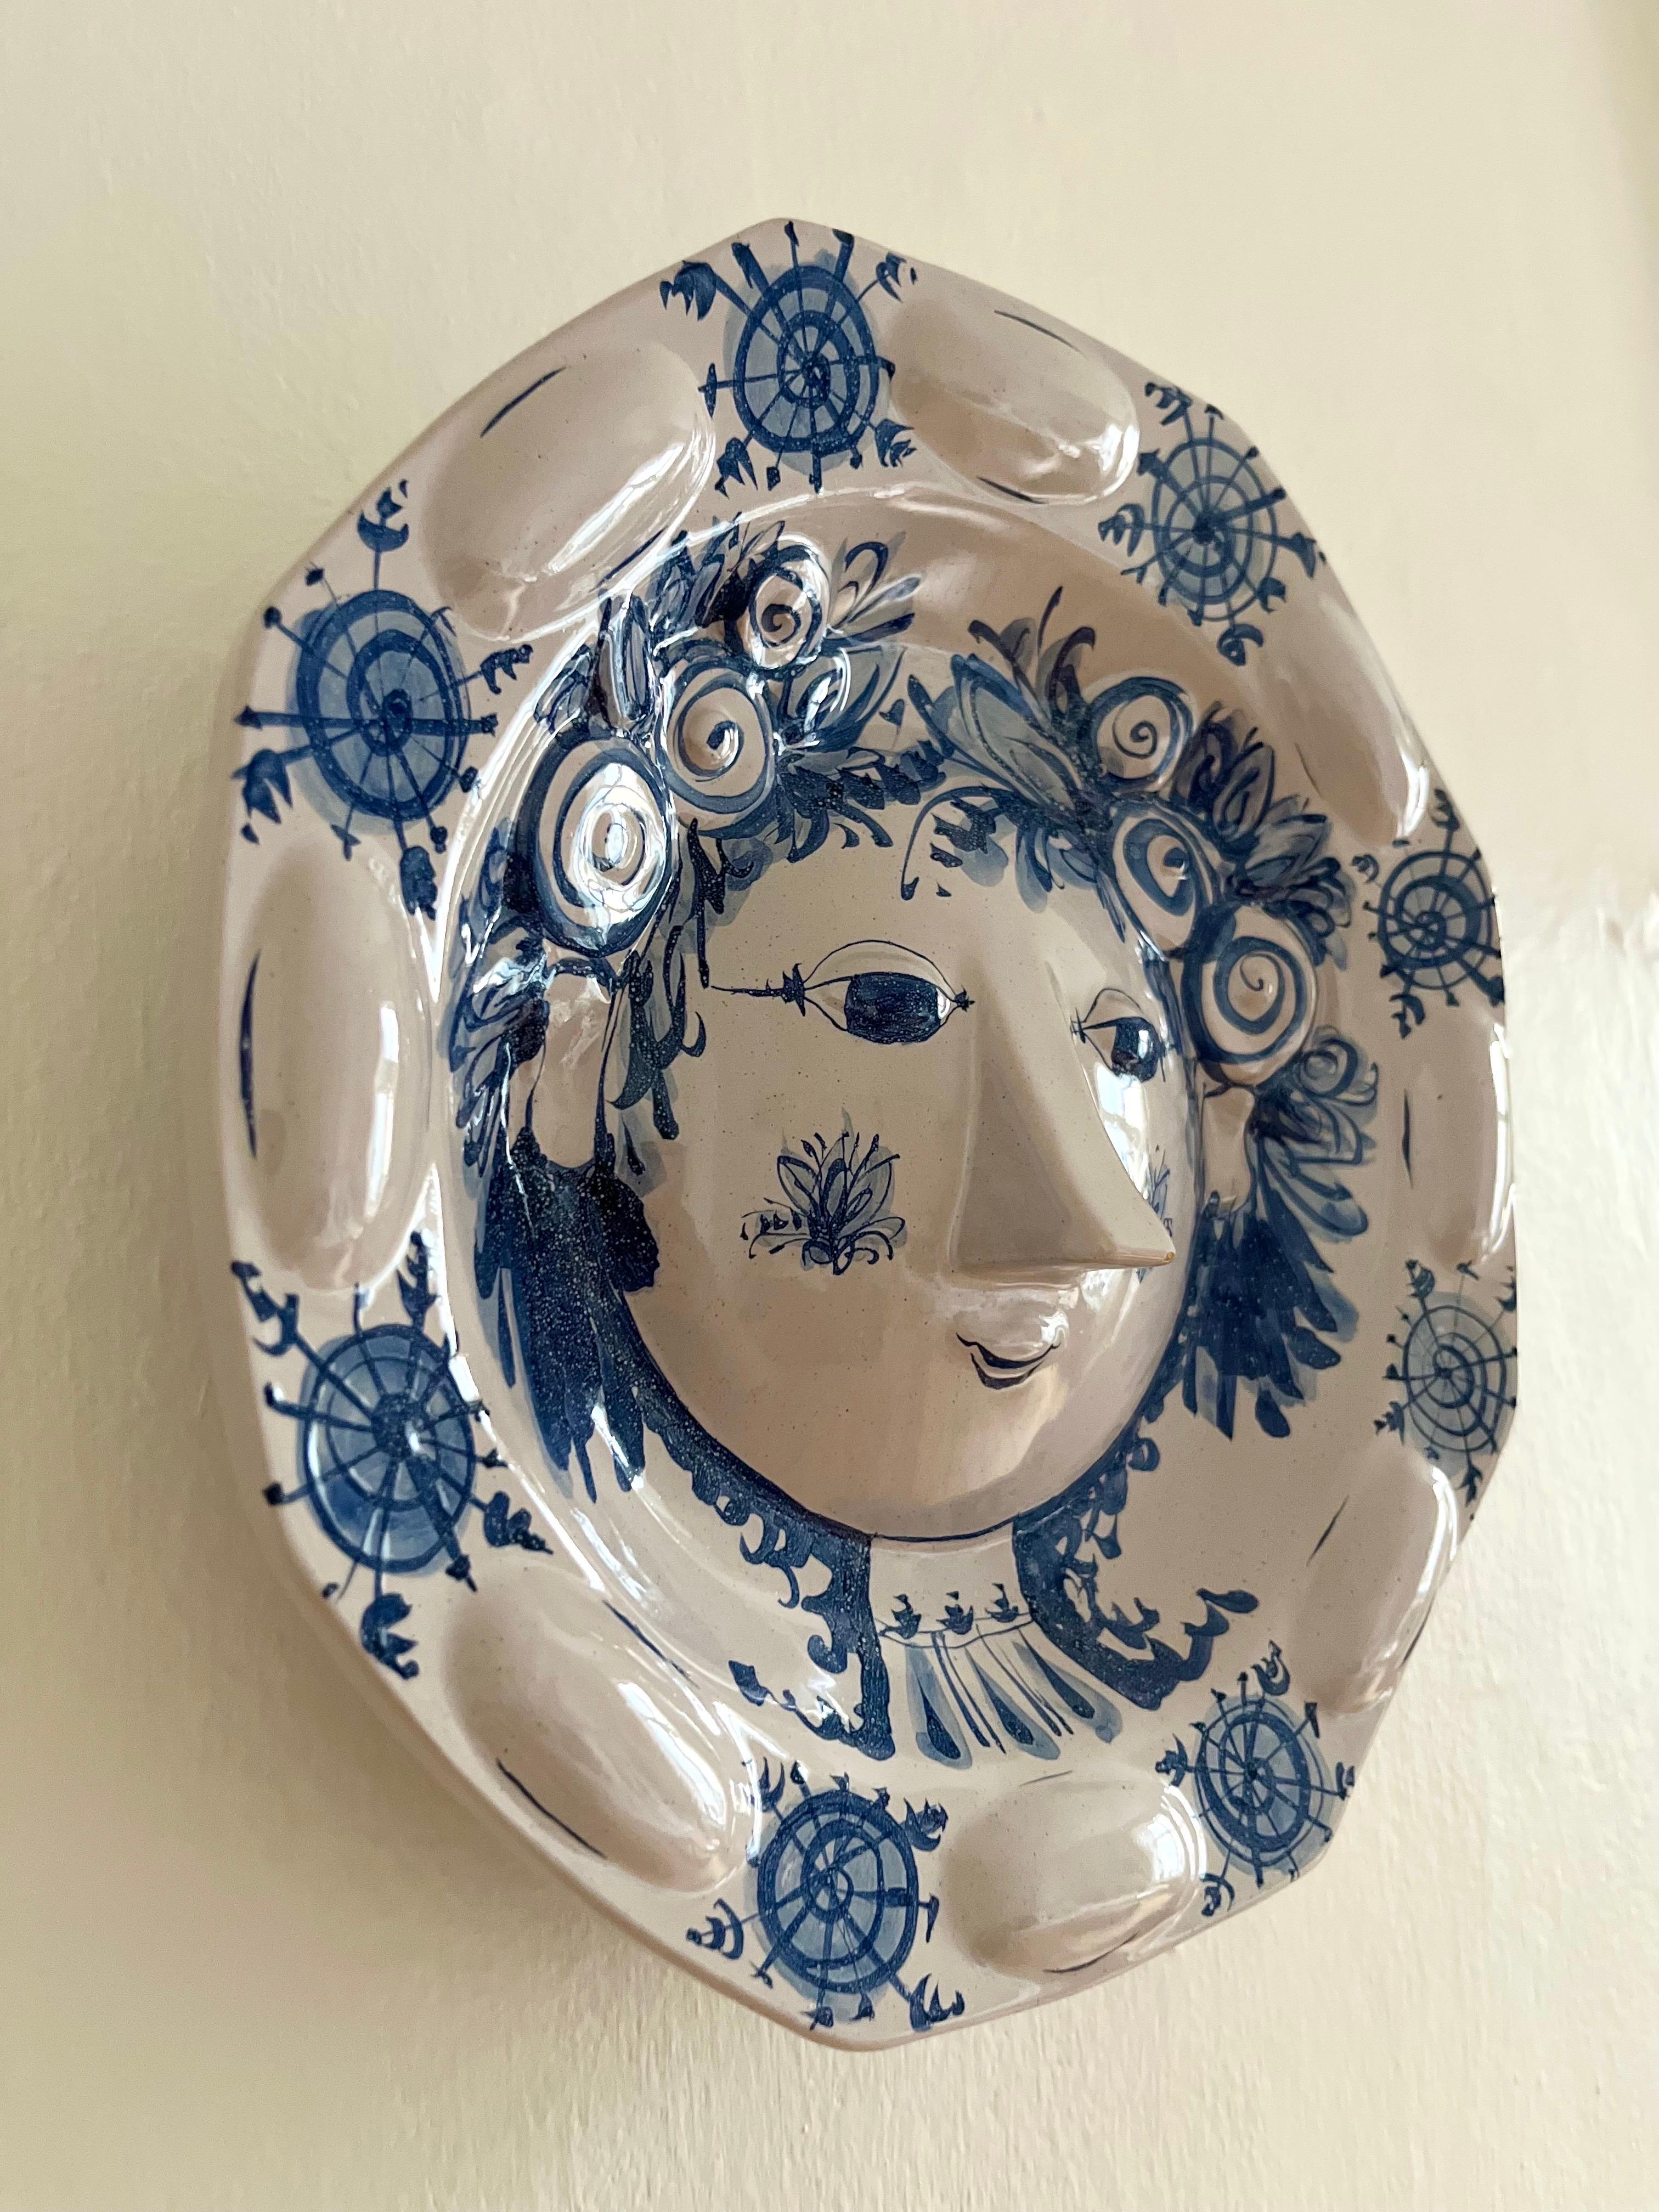 Unique handmade and hand-painted wall decoration / plate by Danish artist Bjørn Wiinblad from 1975. Depicts a woman's face in glazed ceramic, white and blue. Very decorative, this piece is hand sculpted in a reliefic style in Wiinblad's studio,